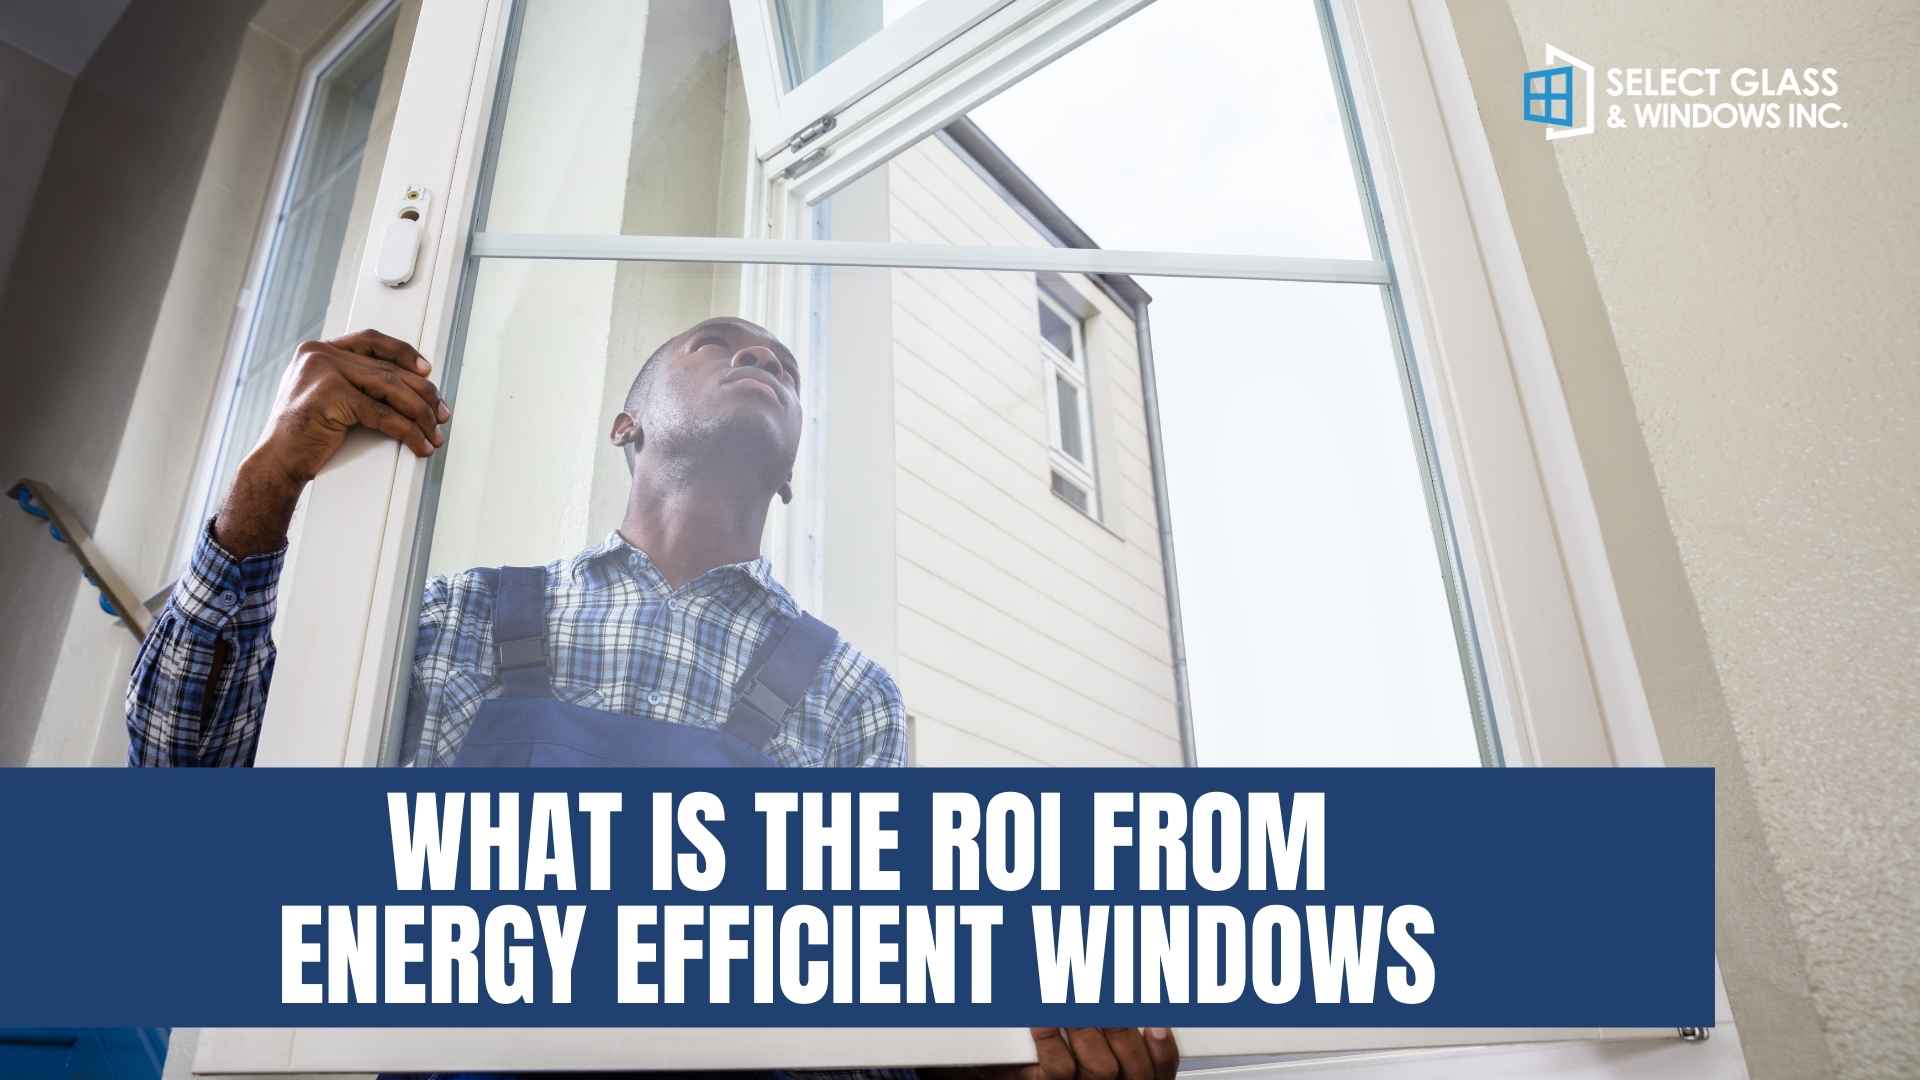 What Is the ROI from Energy Efficient Windows